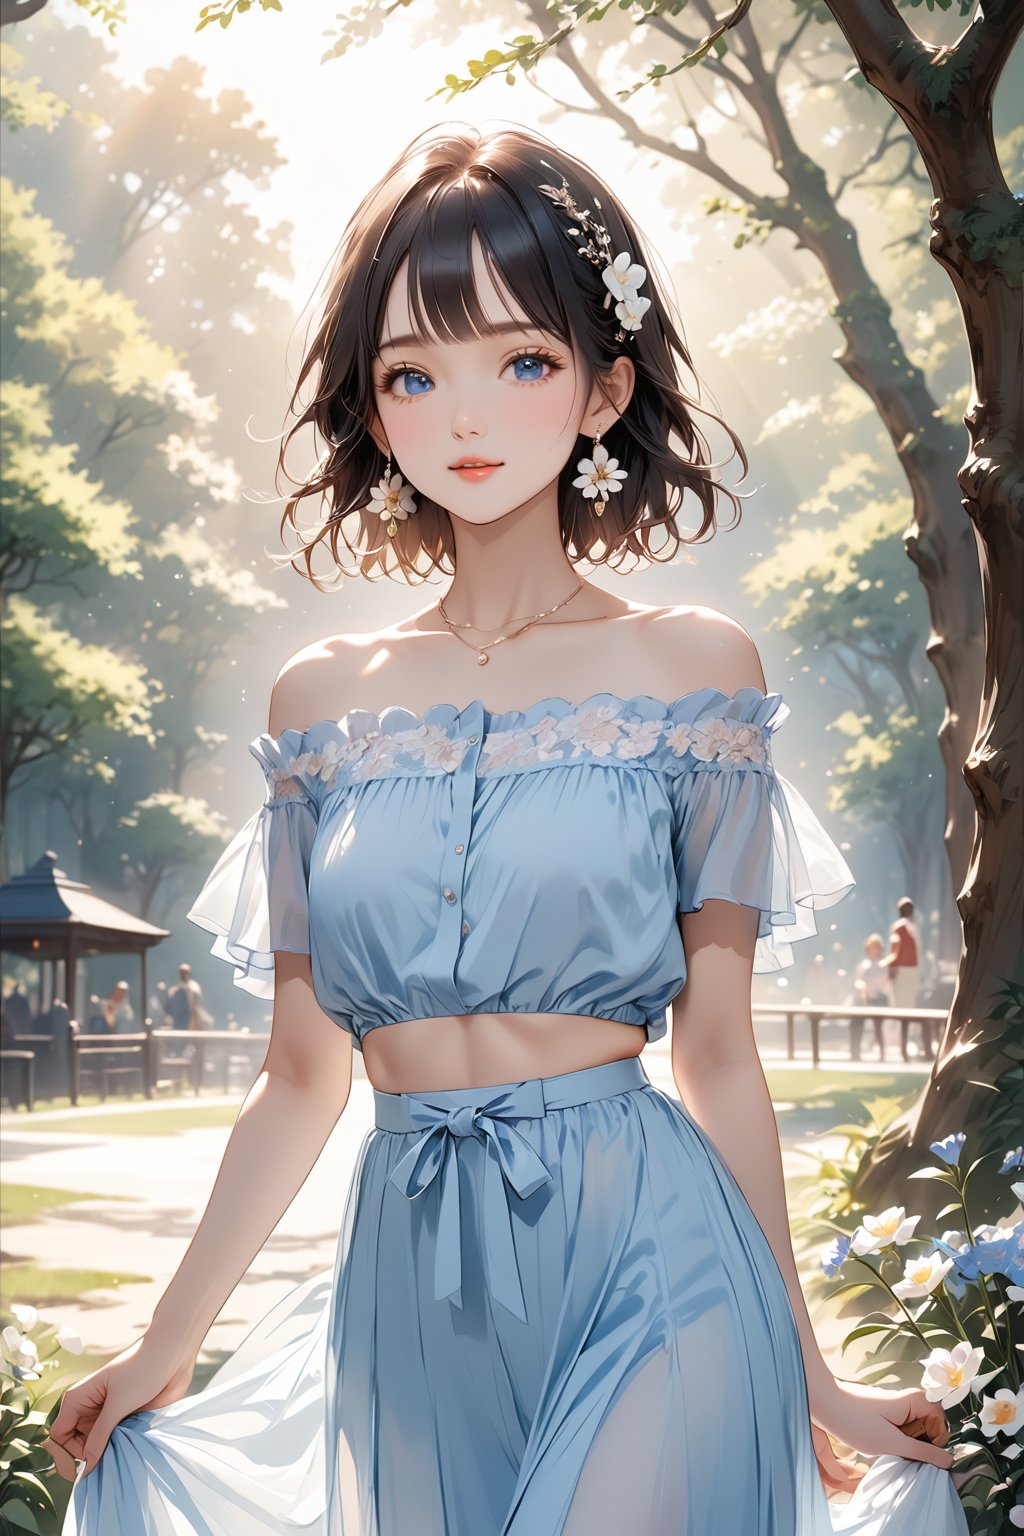 (8k, best quality, (look up:1.2), (masterpiece:1.2), ultra high resolution, high contrast, super detailed, professional Lighting, lively atmosphere, Under the bright spring sunshine, sunlight through the trees in a park, beautiful spring flowers, elegant ,  gentle, 1girl, blue eyes, styled black hair, bangs, flower earrings, blue of shoulder dress, hair ornaments, holding, cute appearance, young girl, doe eyes, gentle, happy。Her beautiful face, perfect figure, lovely figure,  peaceful , shine, calm atmosphere.